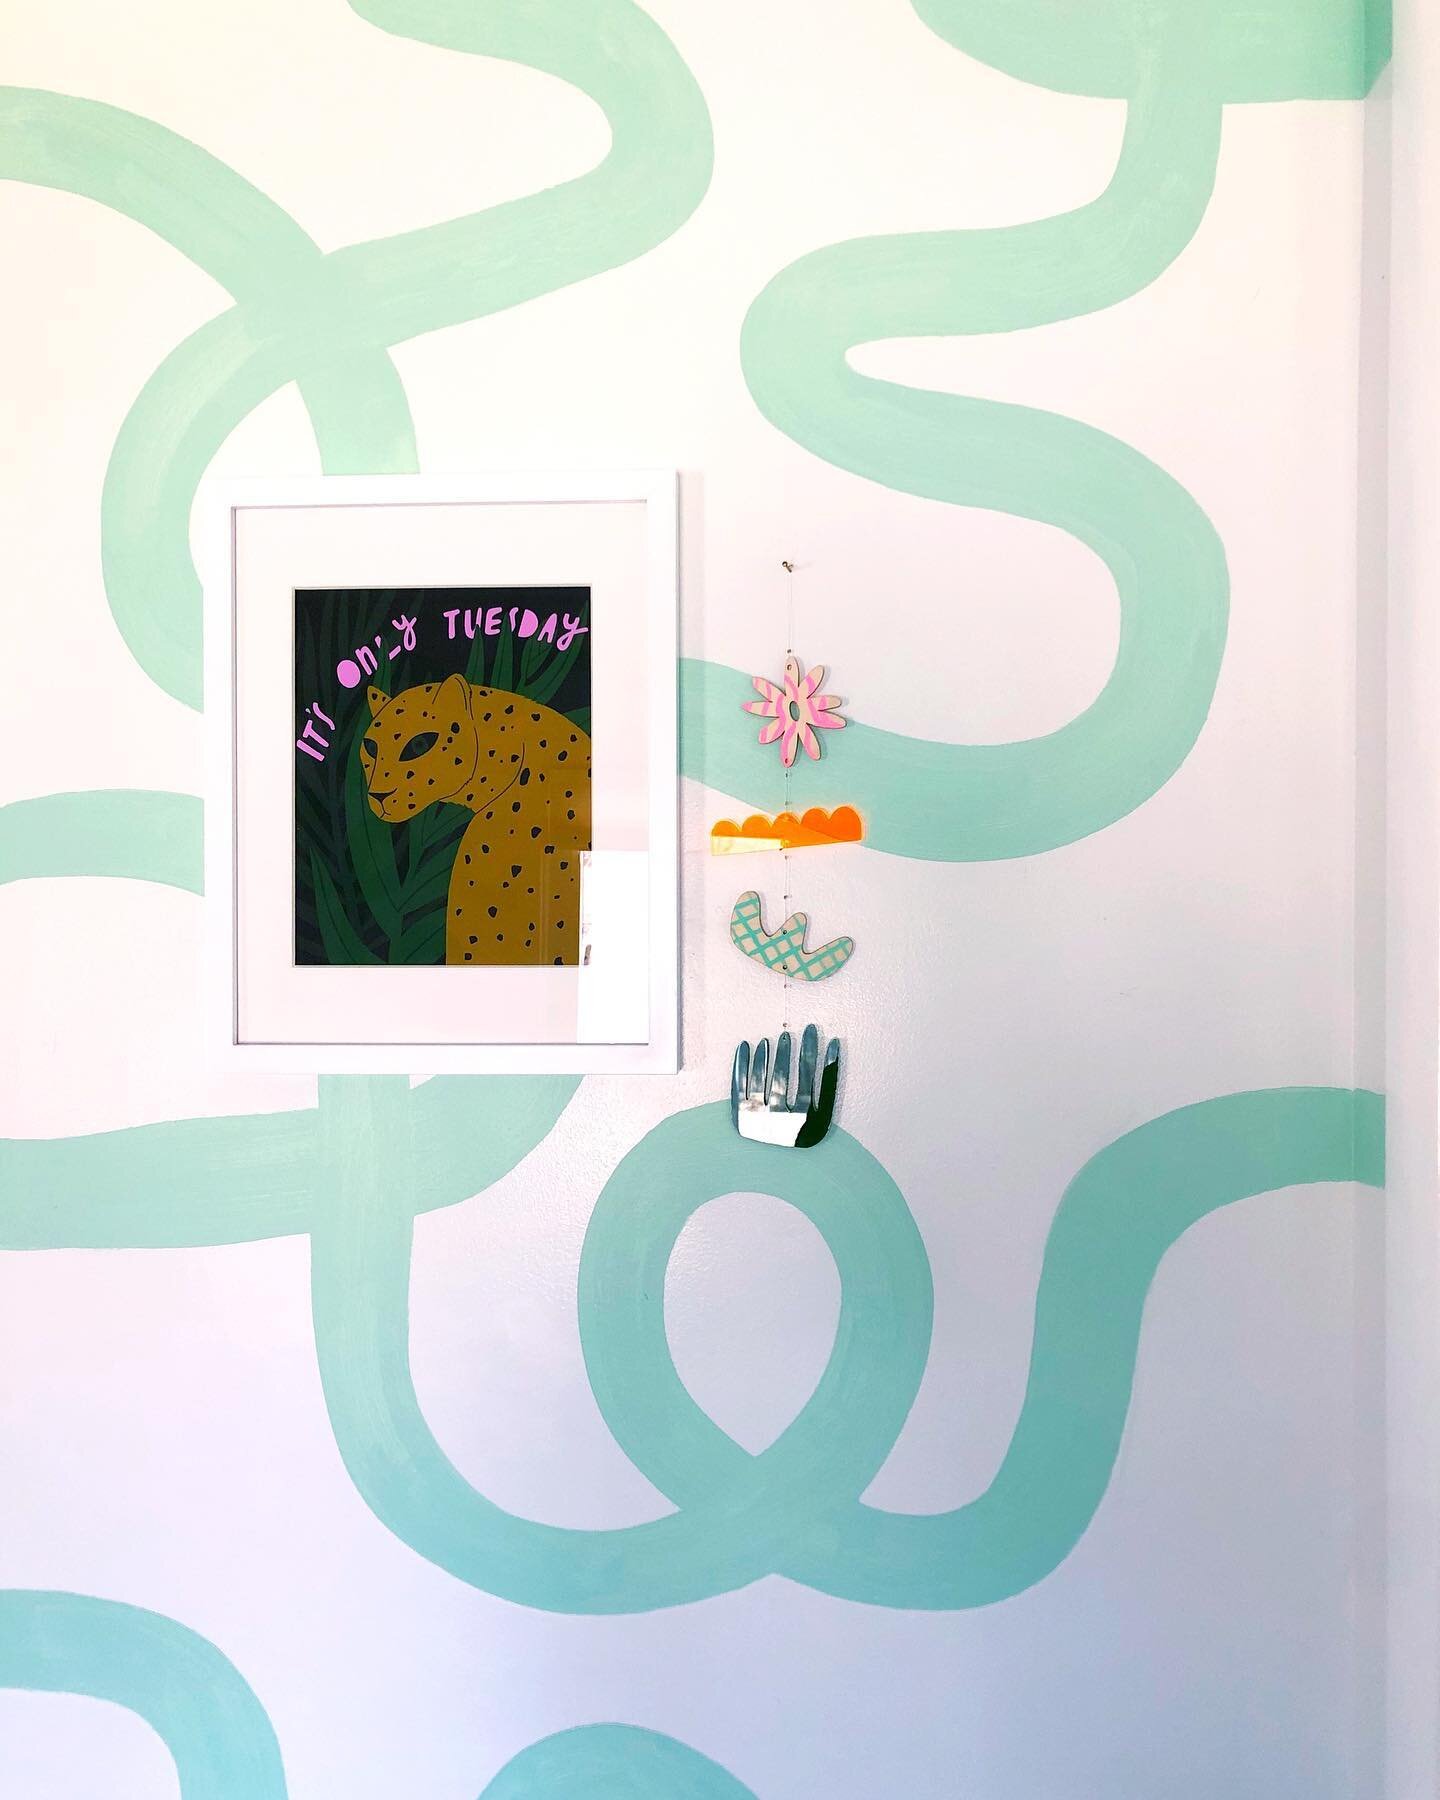 had some fun painting my bathroom walls last week and hung up a print by @bekahworleyco from @ilikeyou_mn alongside one of my wall hangings! fun spring refresh✨